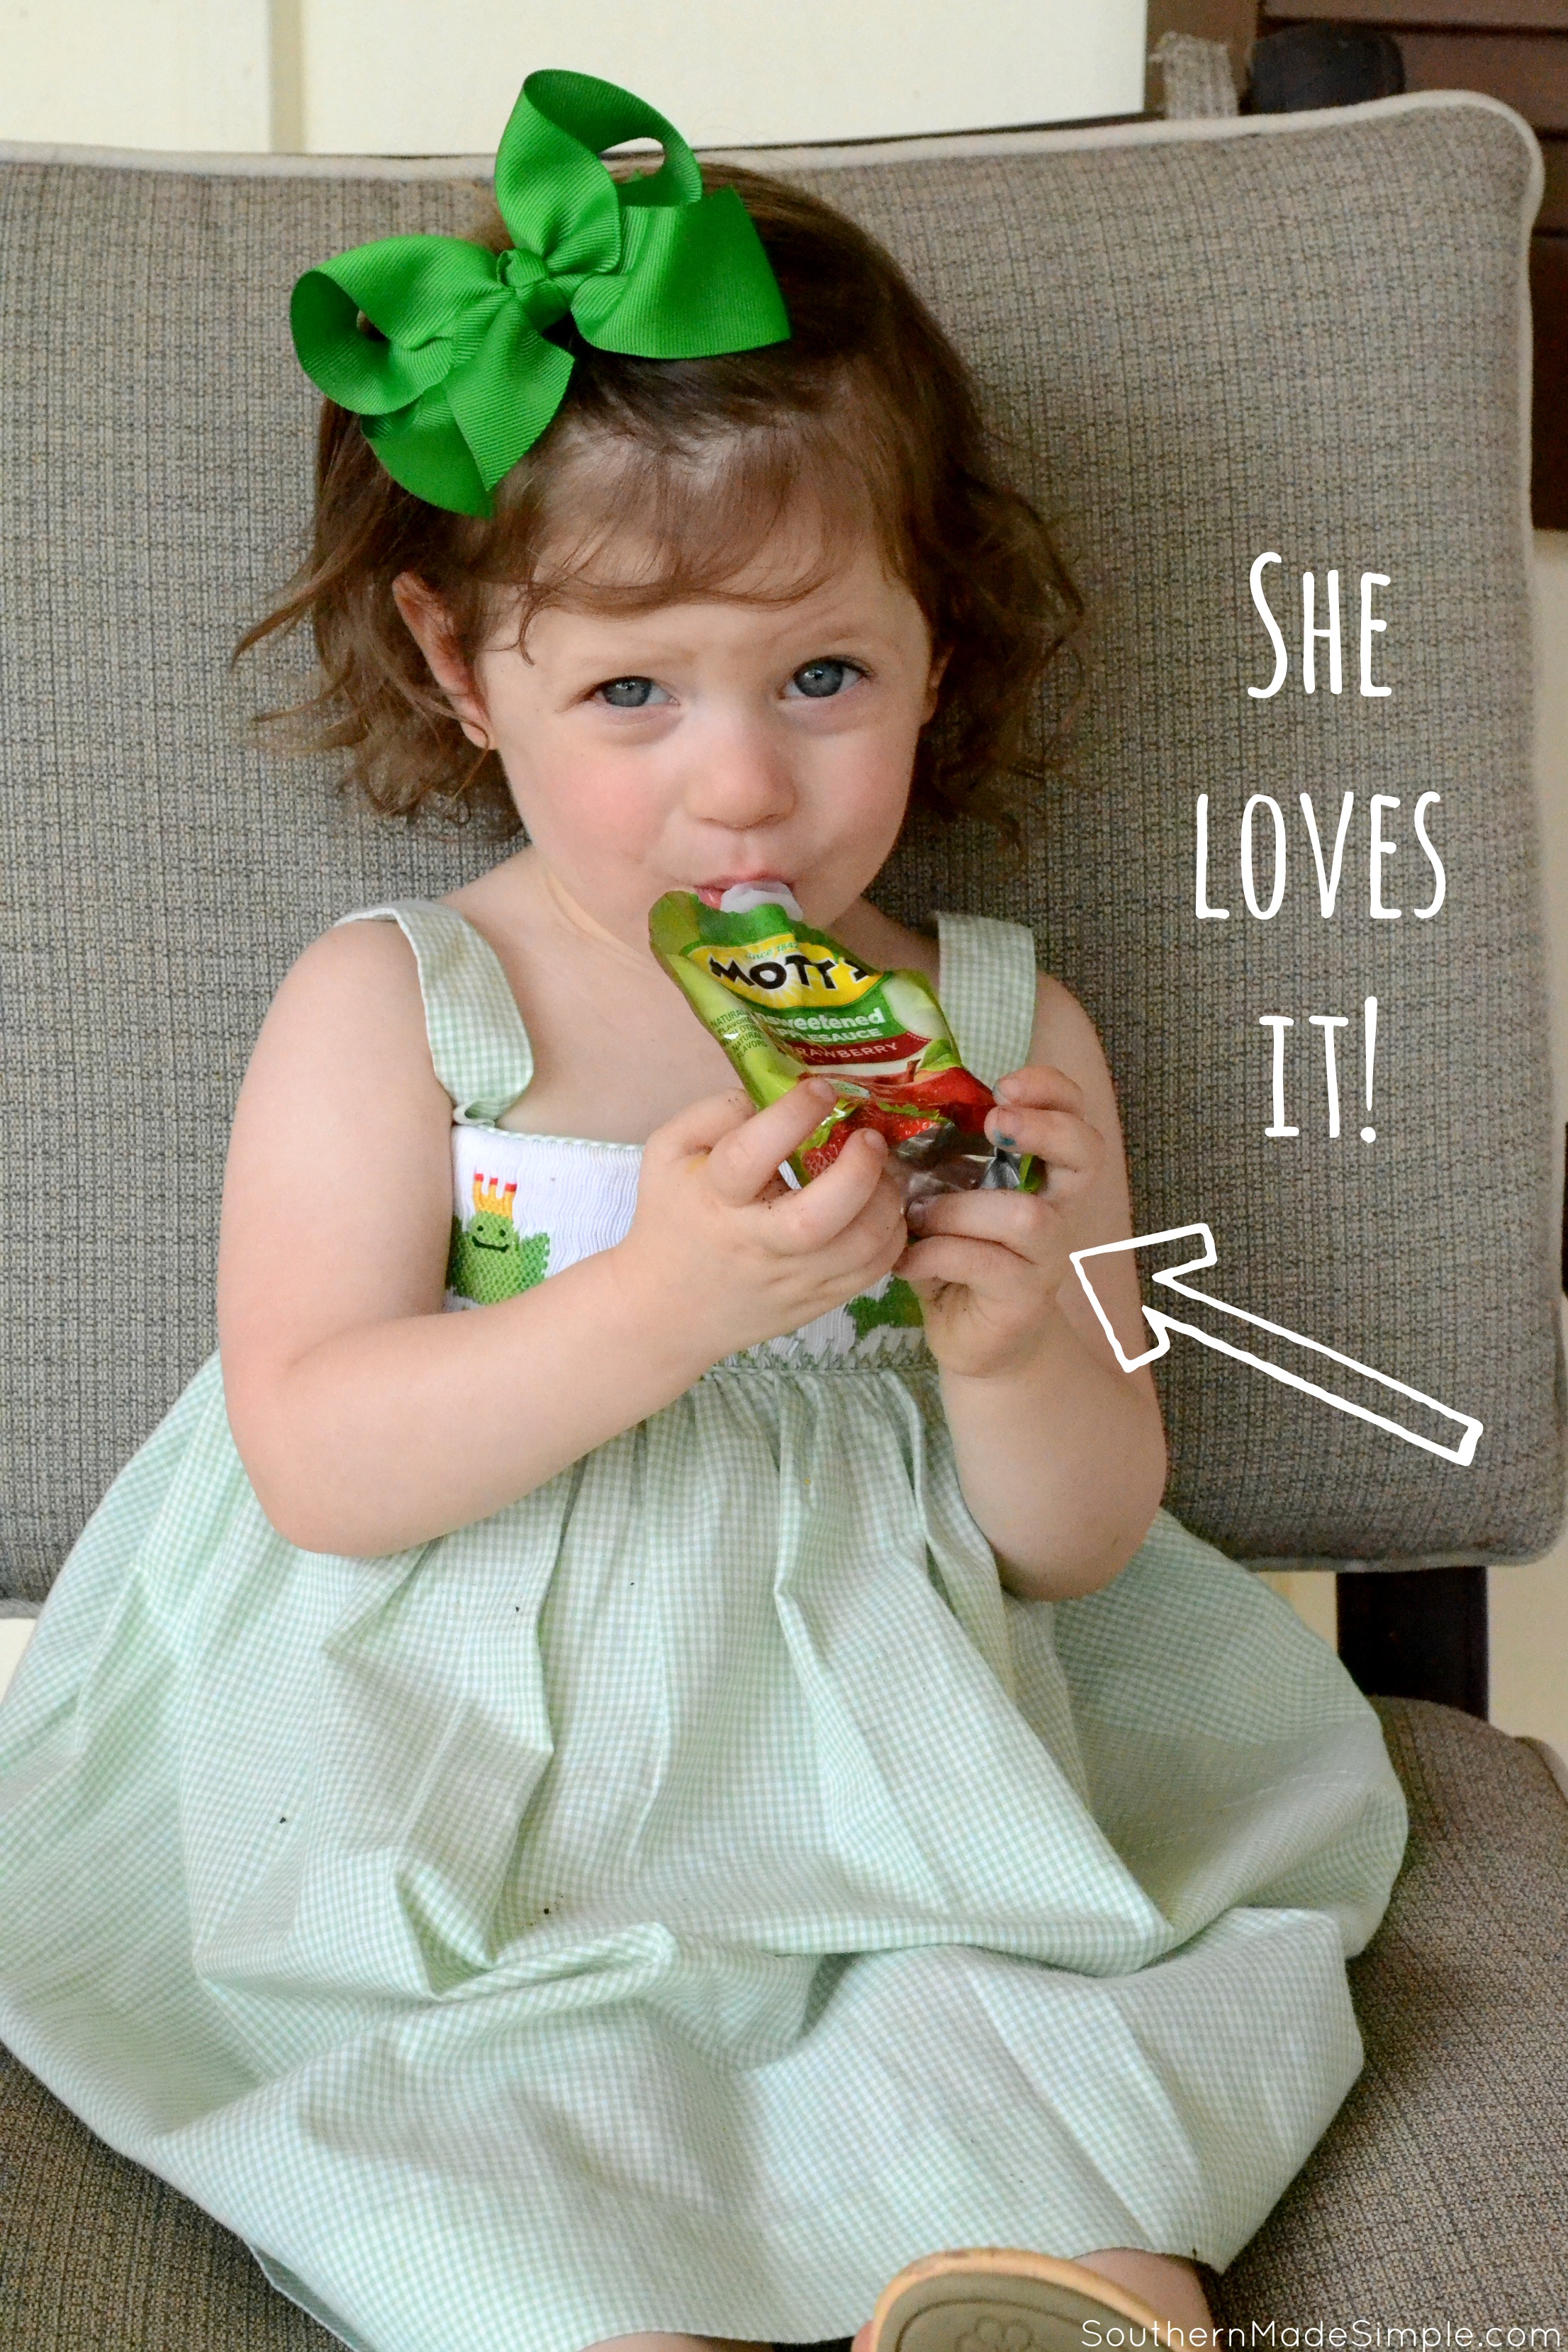 Healthy choices today make for a healthy tomorrow, and Mott's Applesauce and juices are encouraging my daughter to stick to delicious and healthier options so she can grow big and strong! Learn how to snag a free growth chart from Mott's +plus see how we repurposed applesauce cups and used them in our garden! #WatchMeGrow #ad @Motts